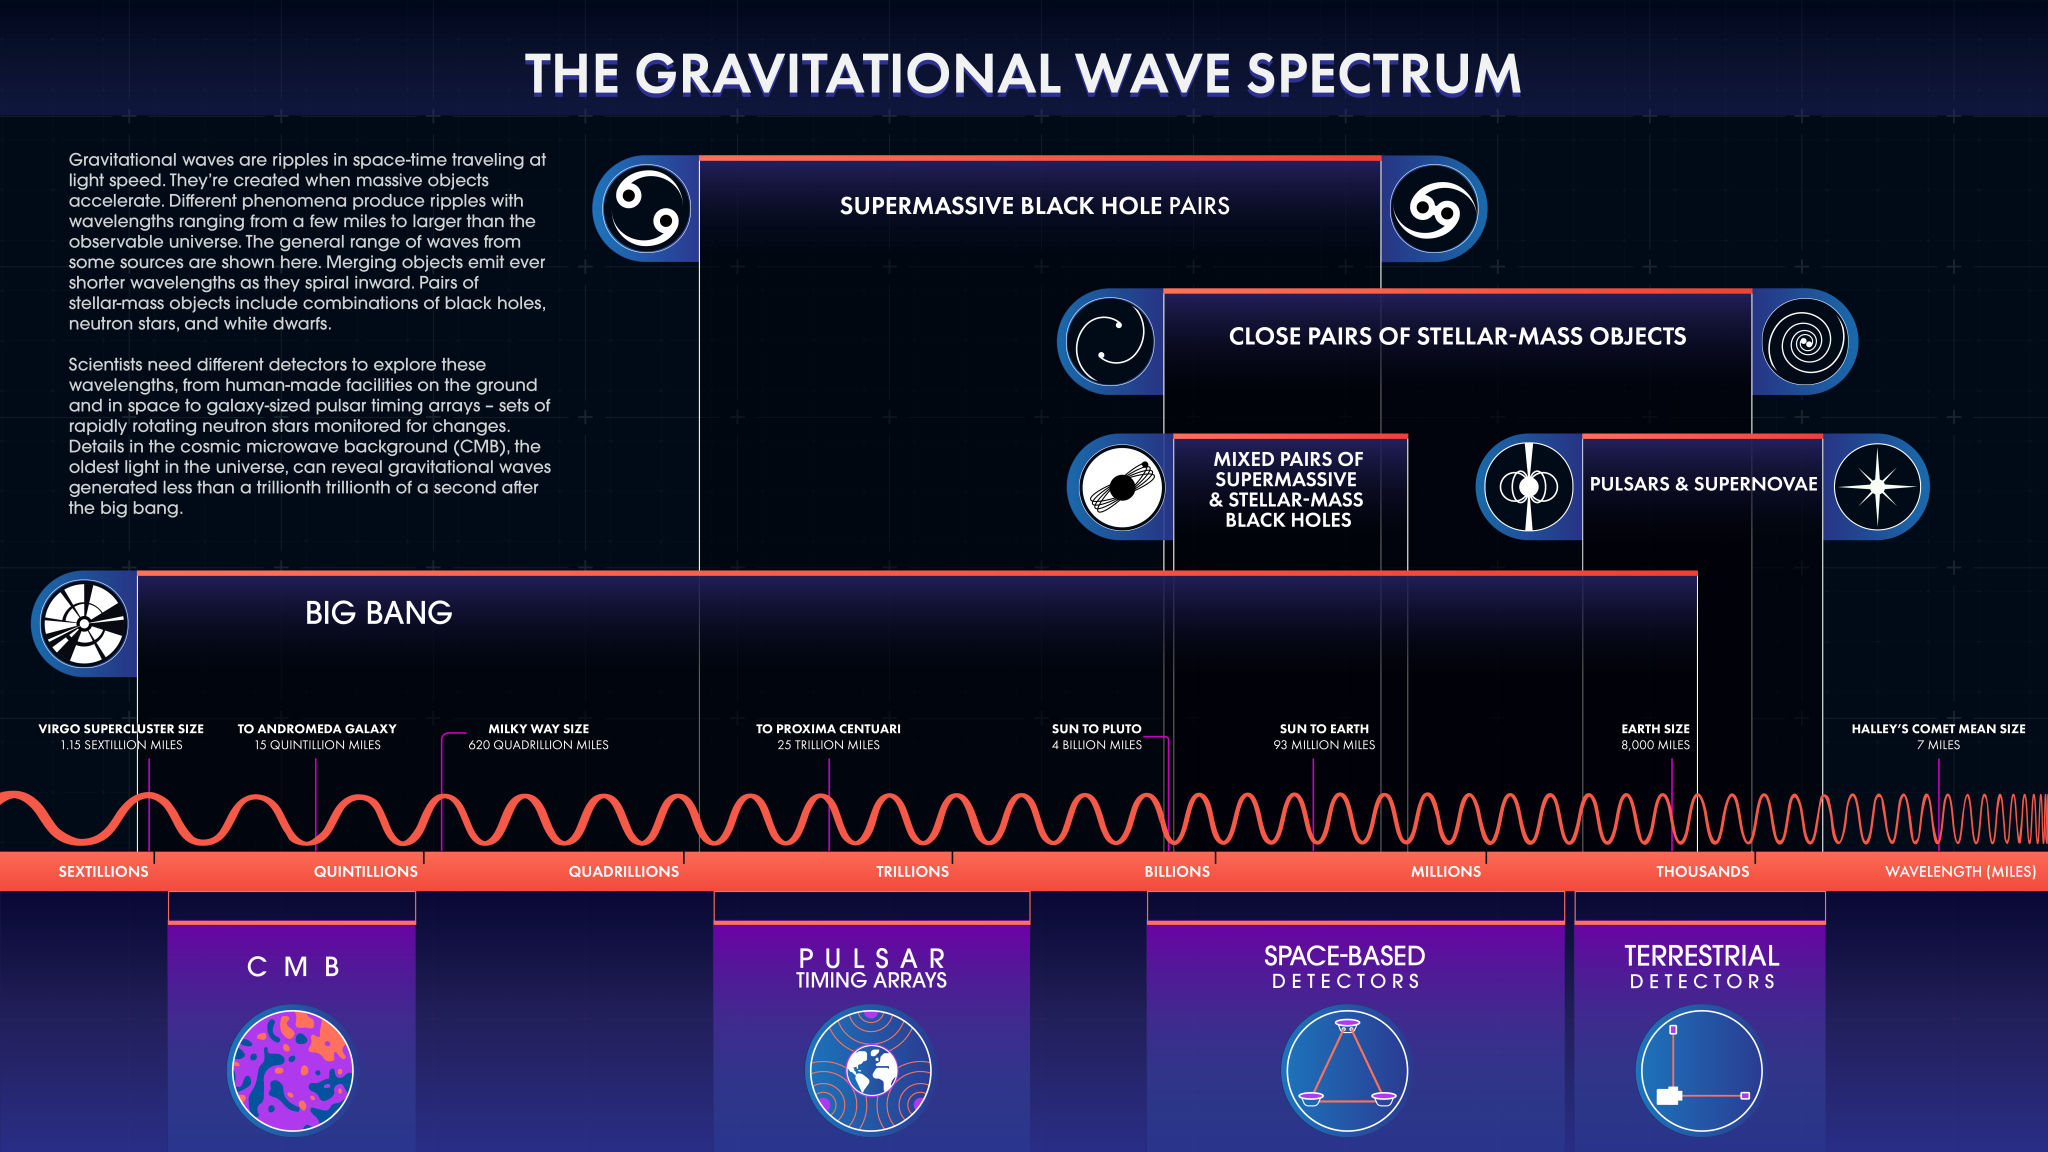 This infographic shows the different parts of the gravitational wave spectrum. It’s broken into three parts: sources, wavelength, and detection methods.